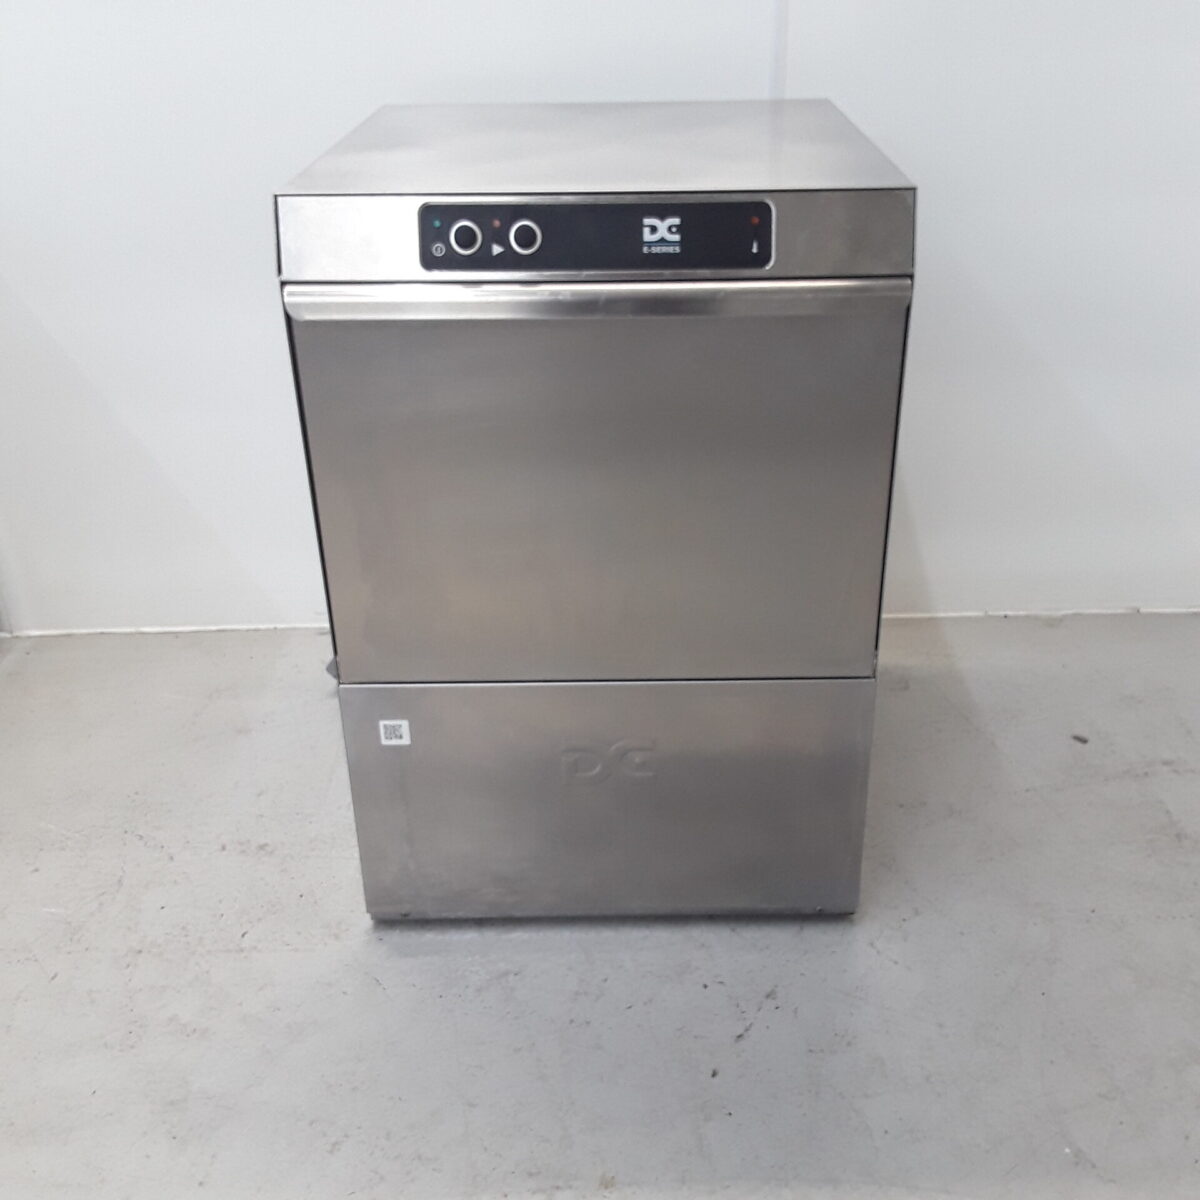 Used DC ED50 Gravity Dishwasher For Sale